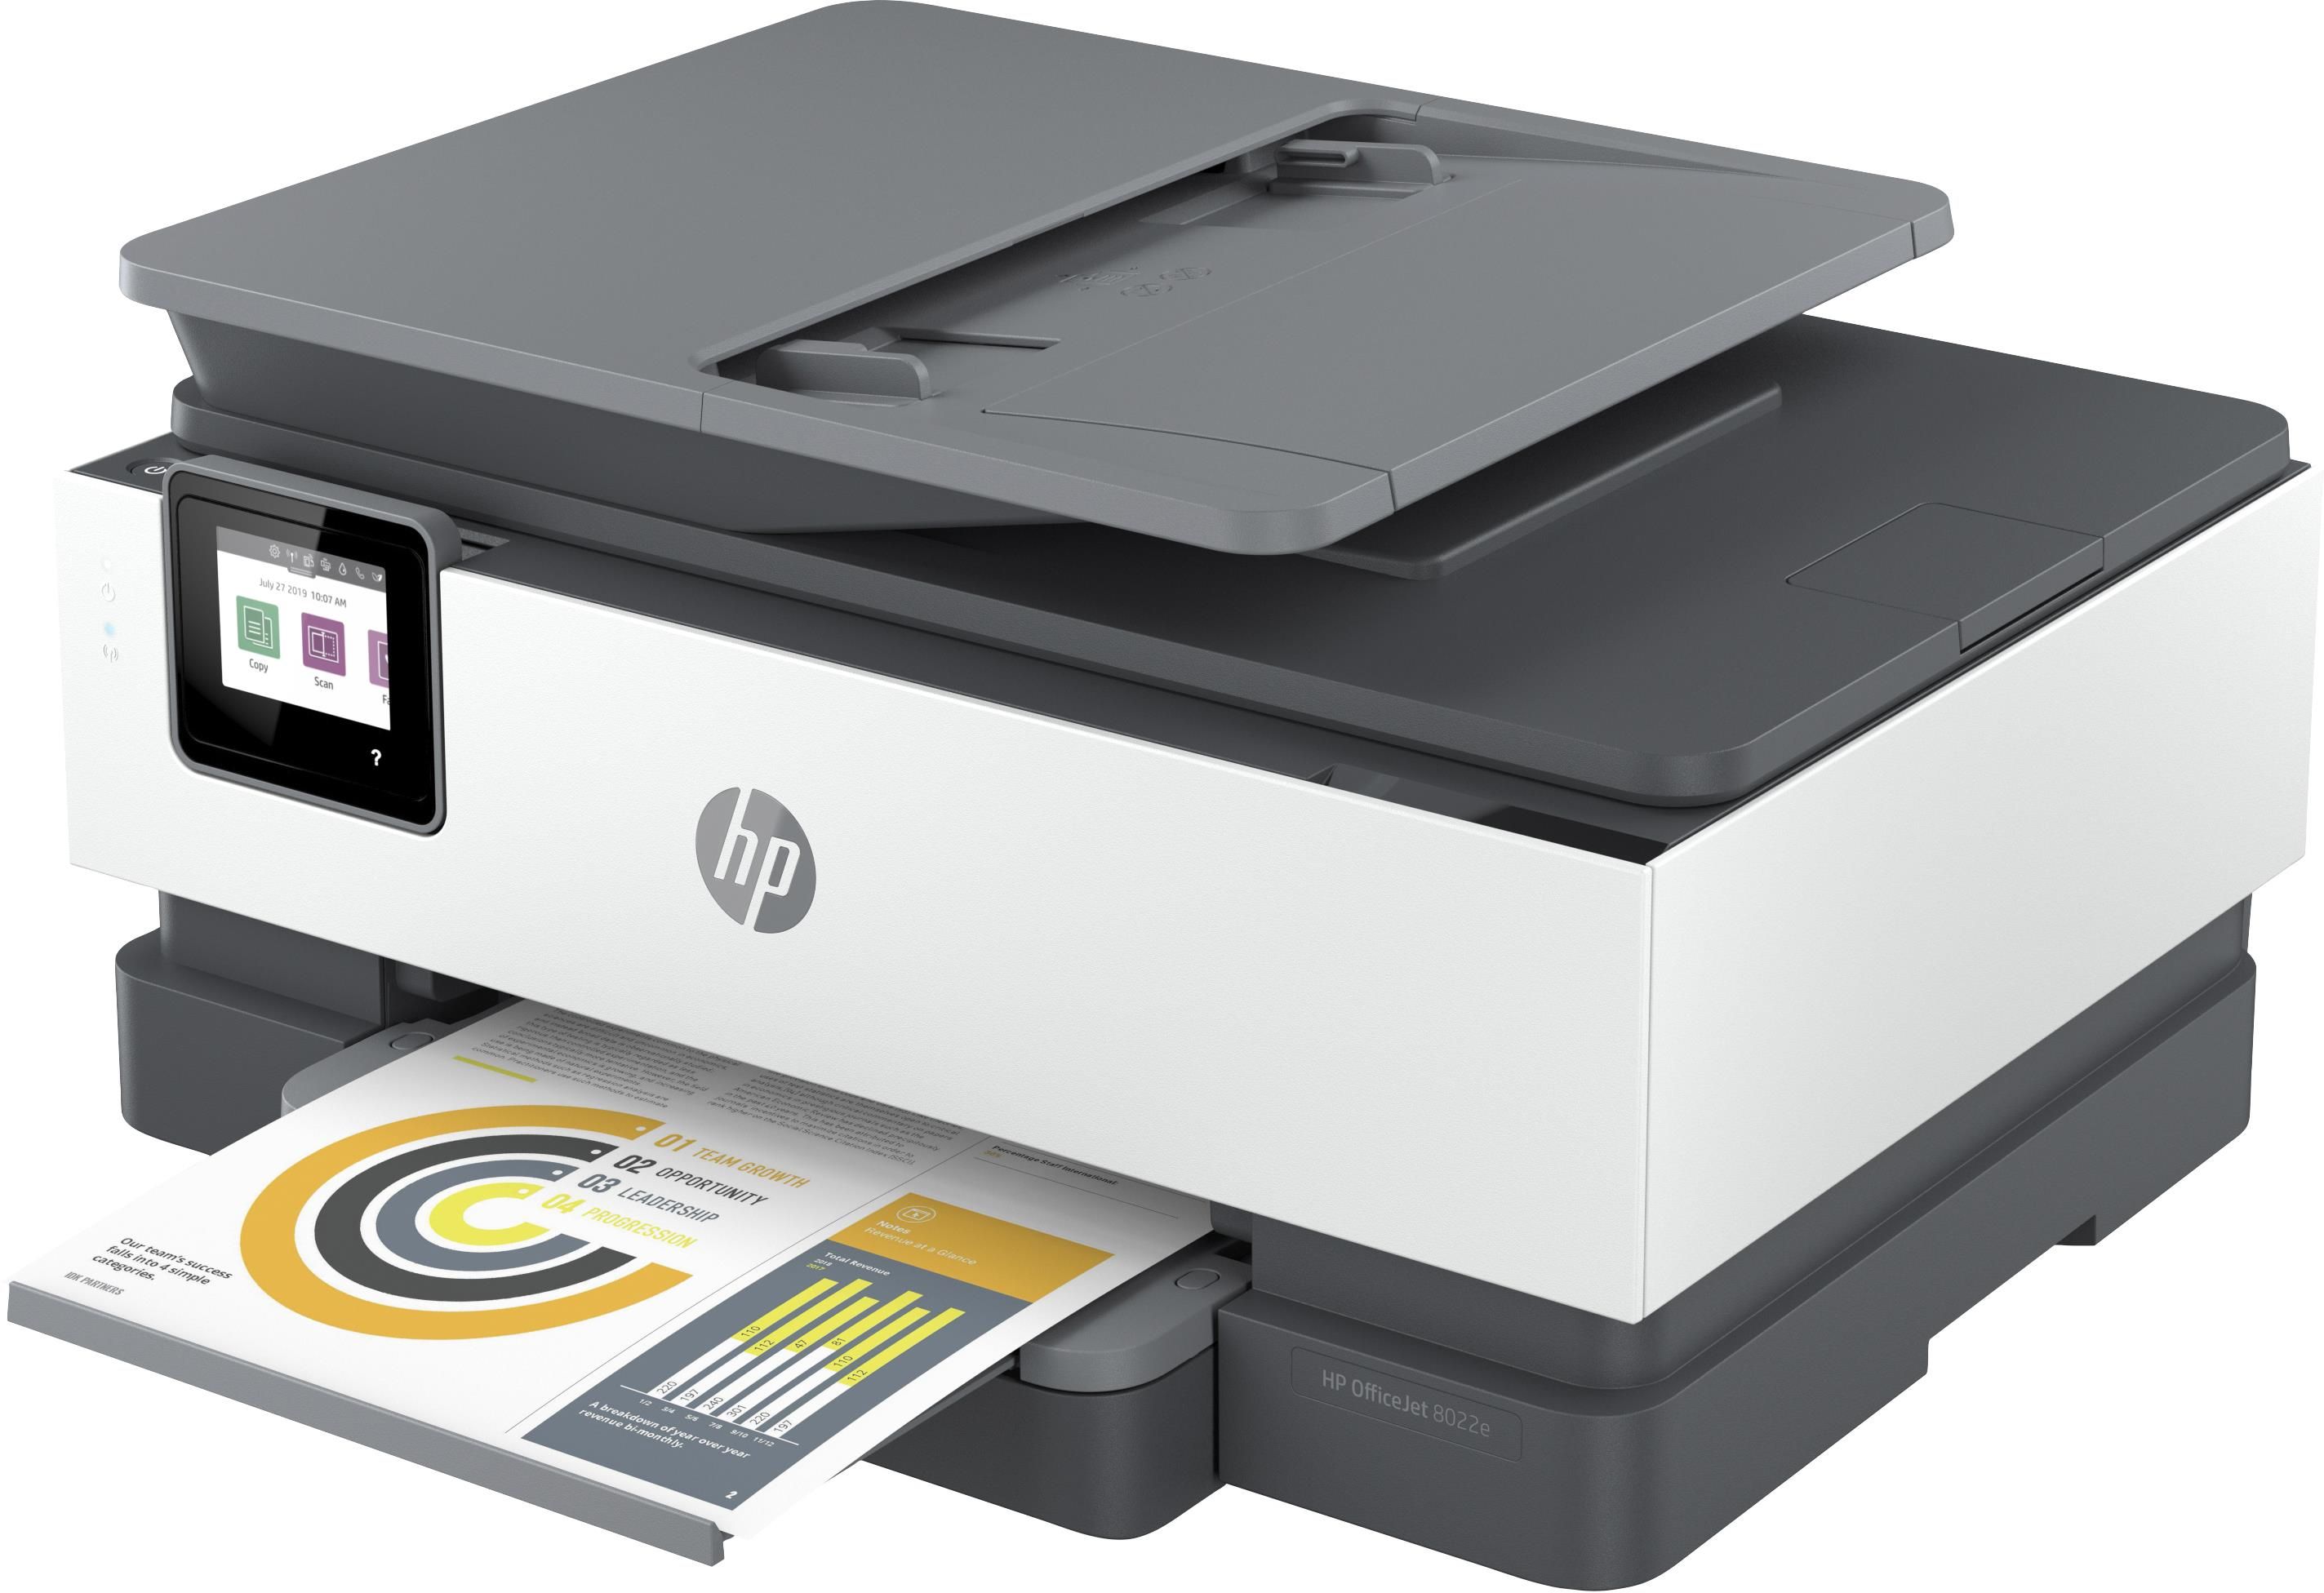 User manual HP OfficeJet Pro 8022 (English - 206 pages)